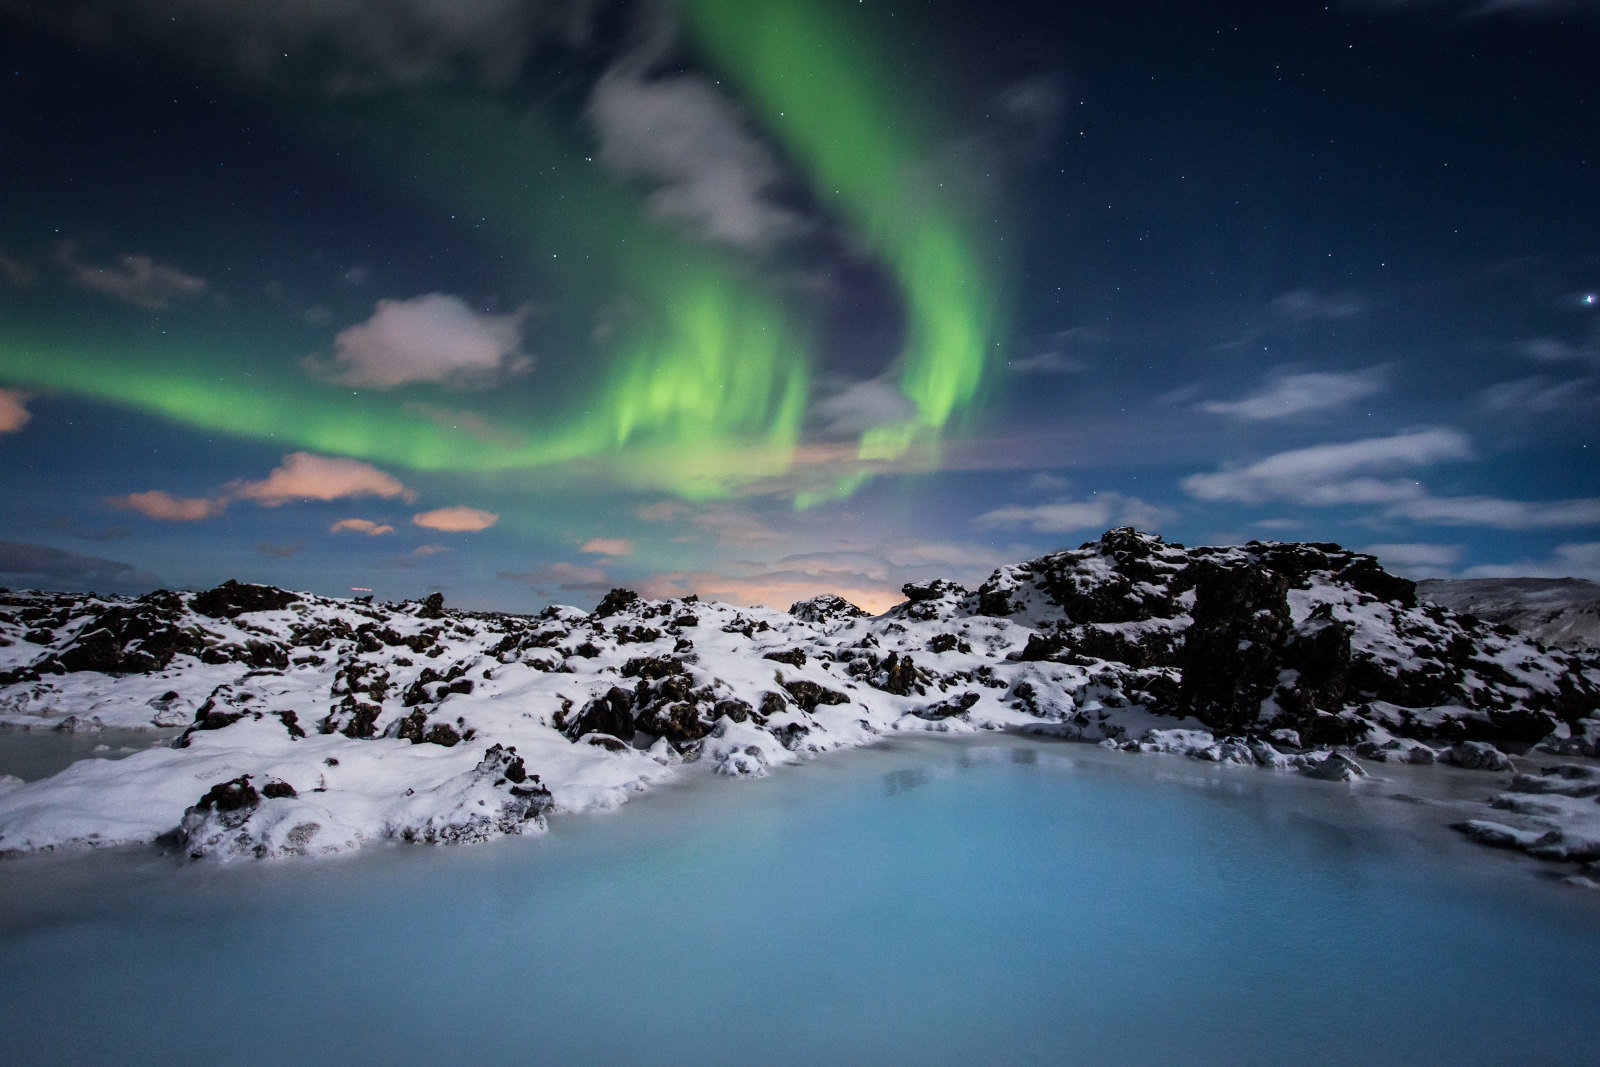 The milky blue water of the blue lagoon pictured with northern lights overhead